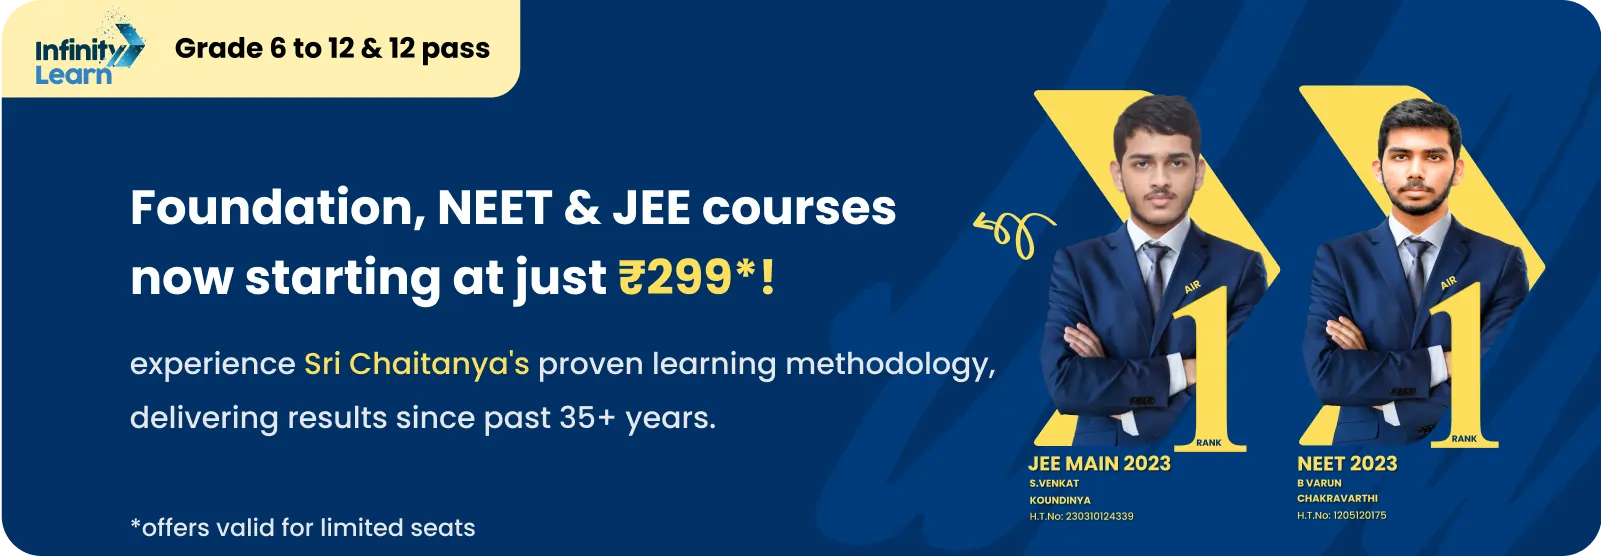 foundation jee neet repeater online course